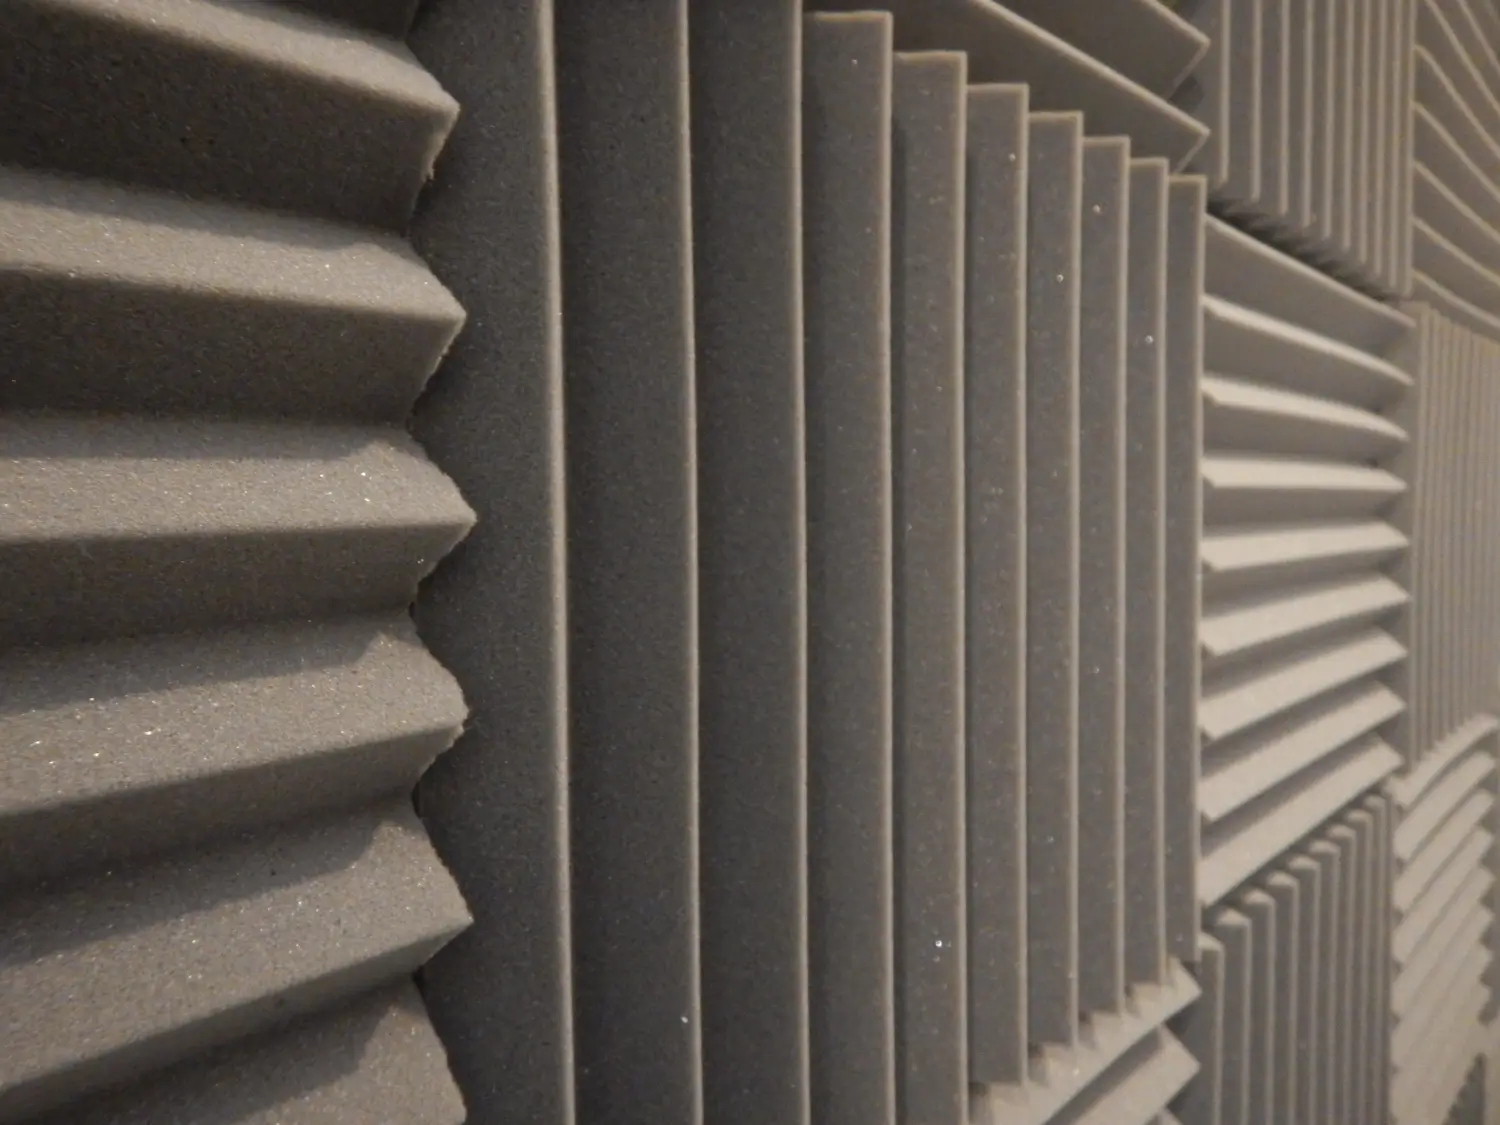 How to soundproof a closet: Acoustic panels are specially designed to treat room acoustics by reducing echoes and reverberations.